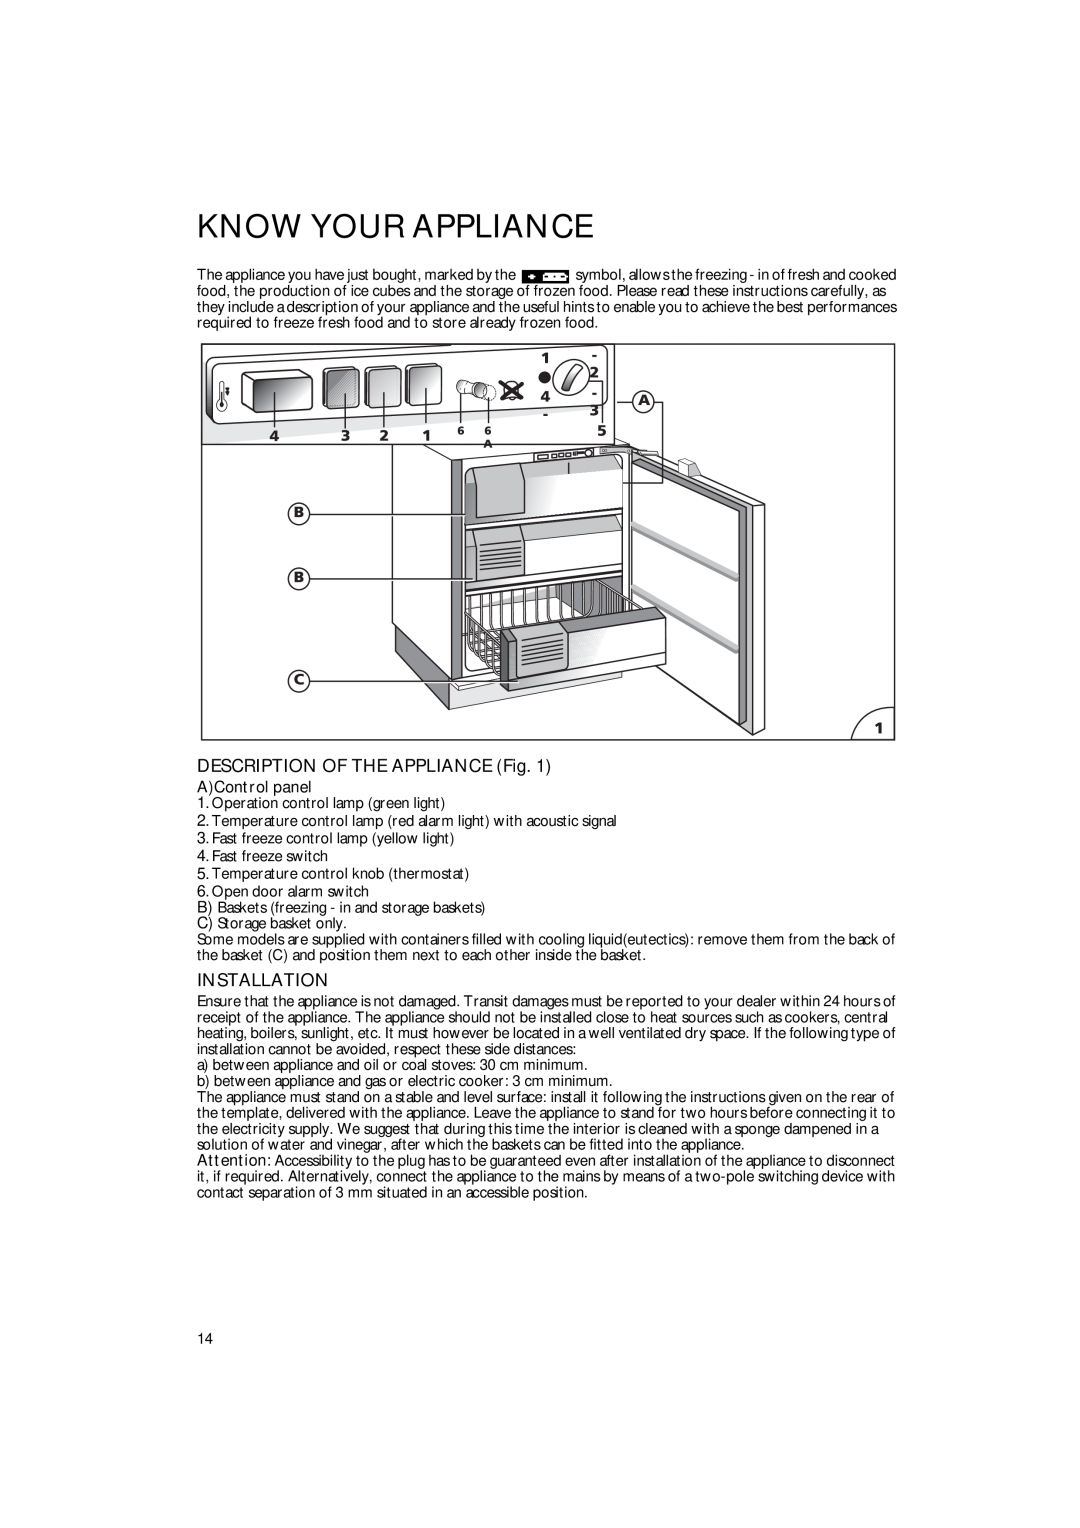 Smeg VR115A manual Know Your Appliance, DESCRIPTION OF THE APPLIANCE Fig, Installation, AControl panel 